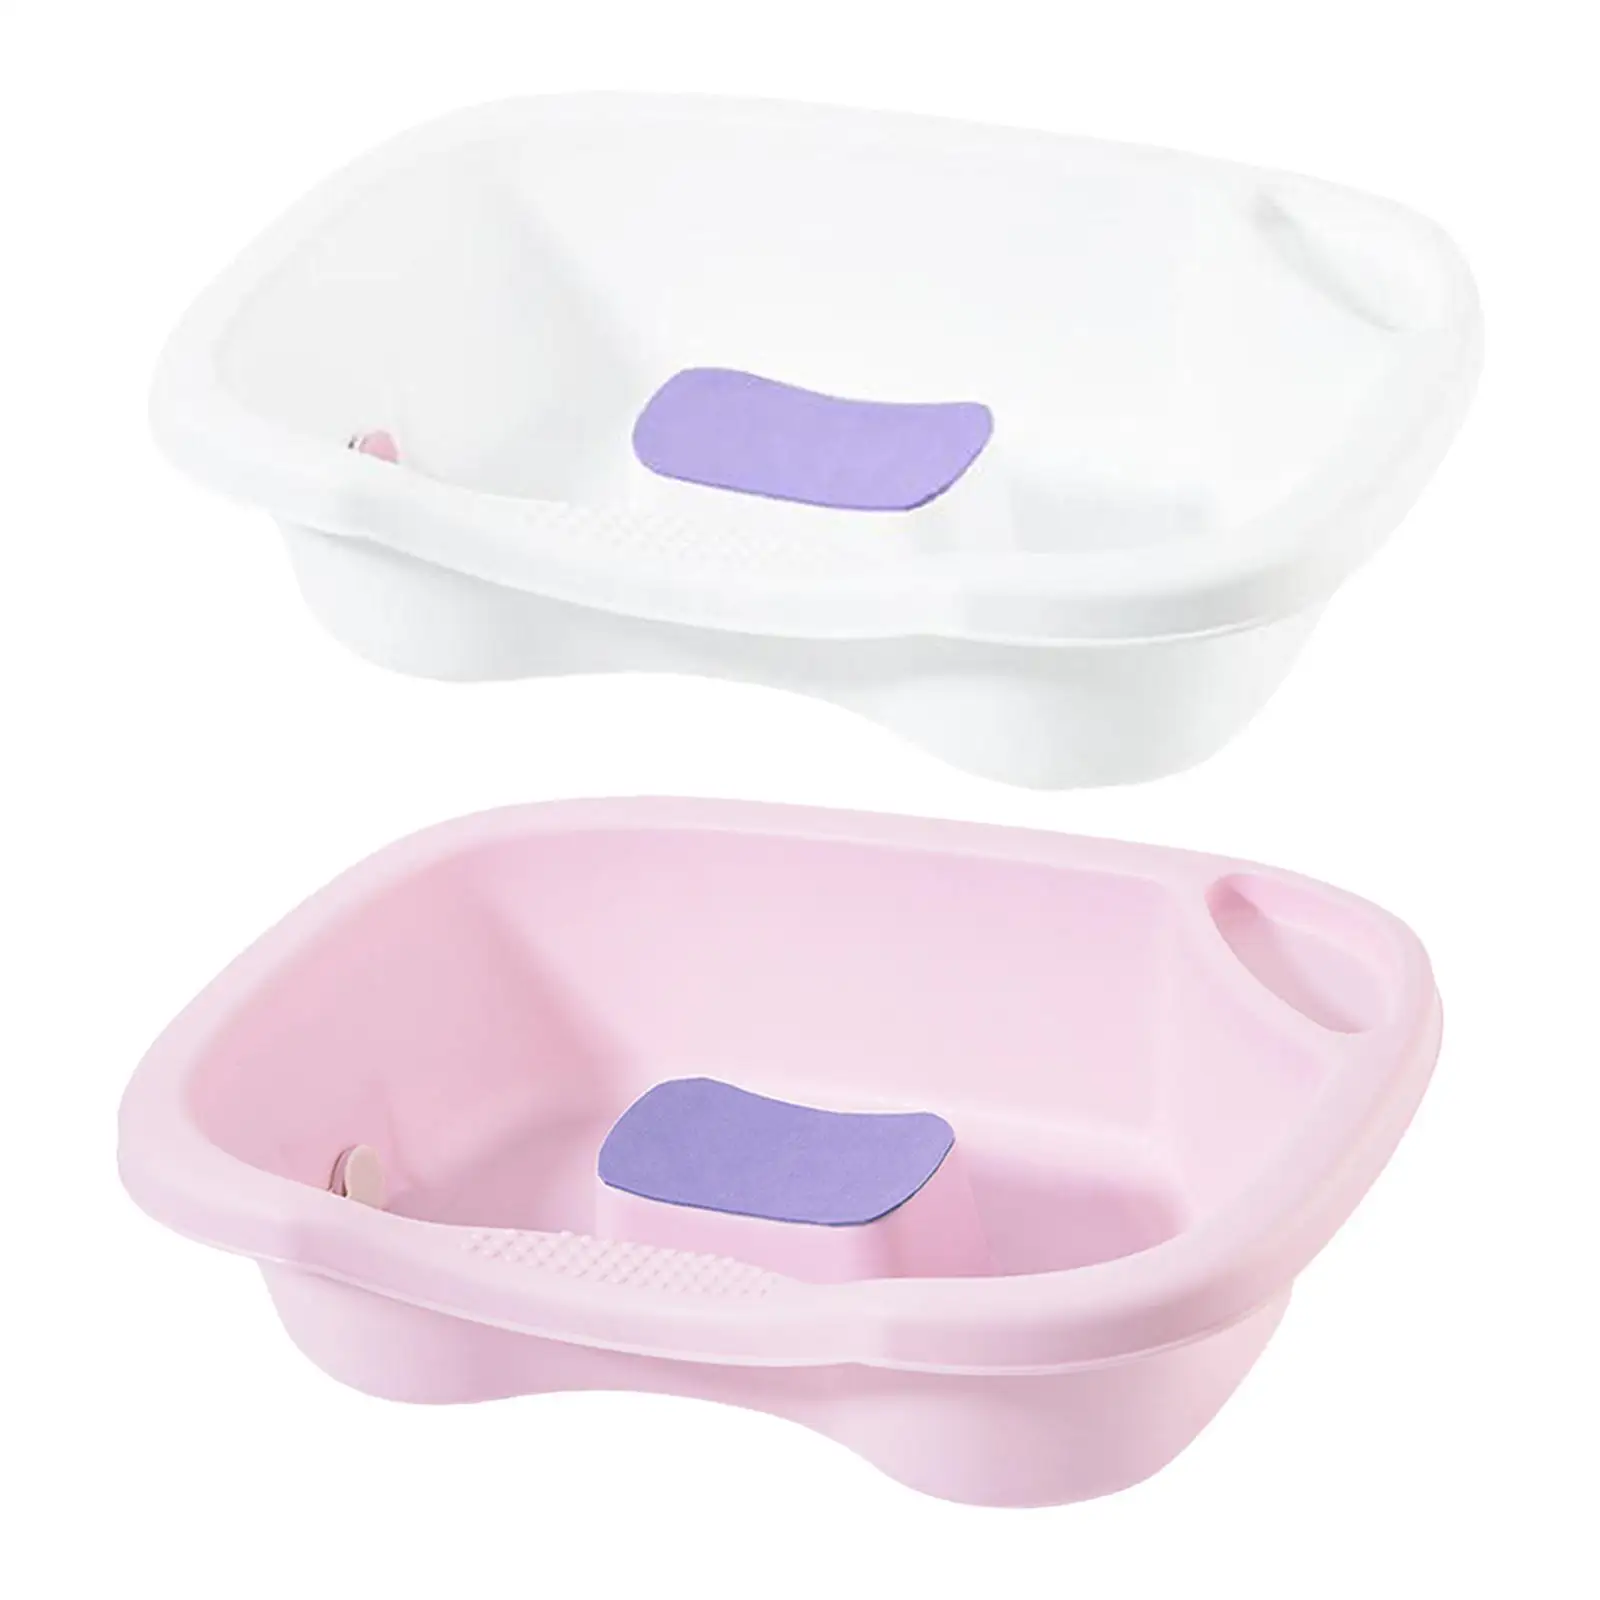 Portable Bed Shampoo Basin with Drain Hose with  Stable Tray Bowl for Hair Washing Hairdresser Bedridden Pregnant Disabled